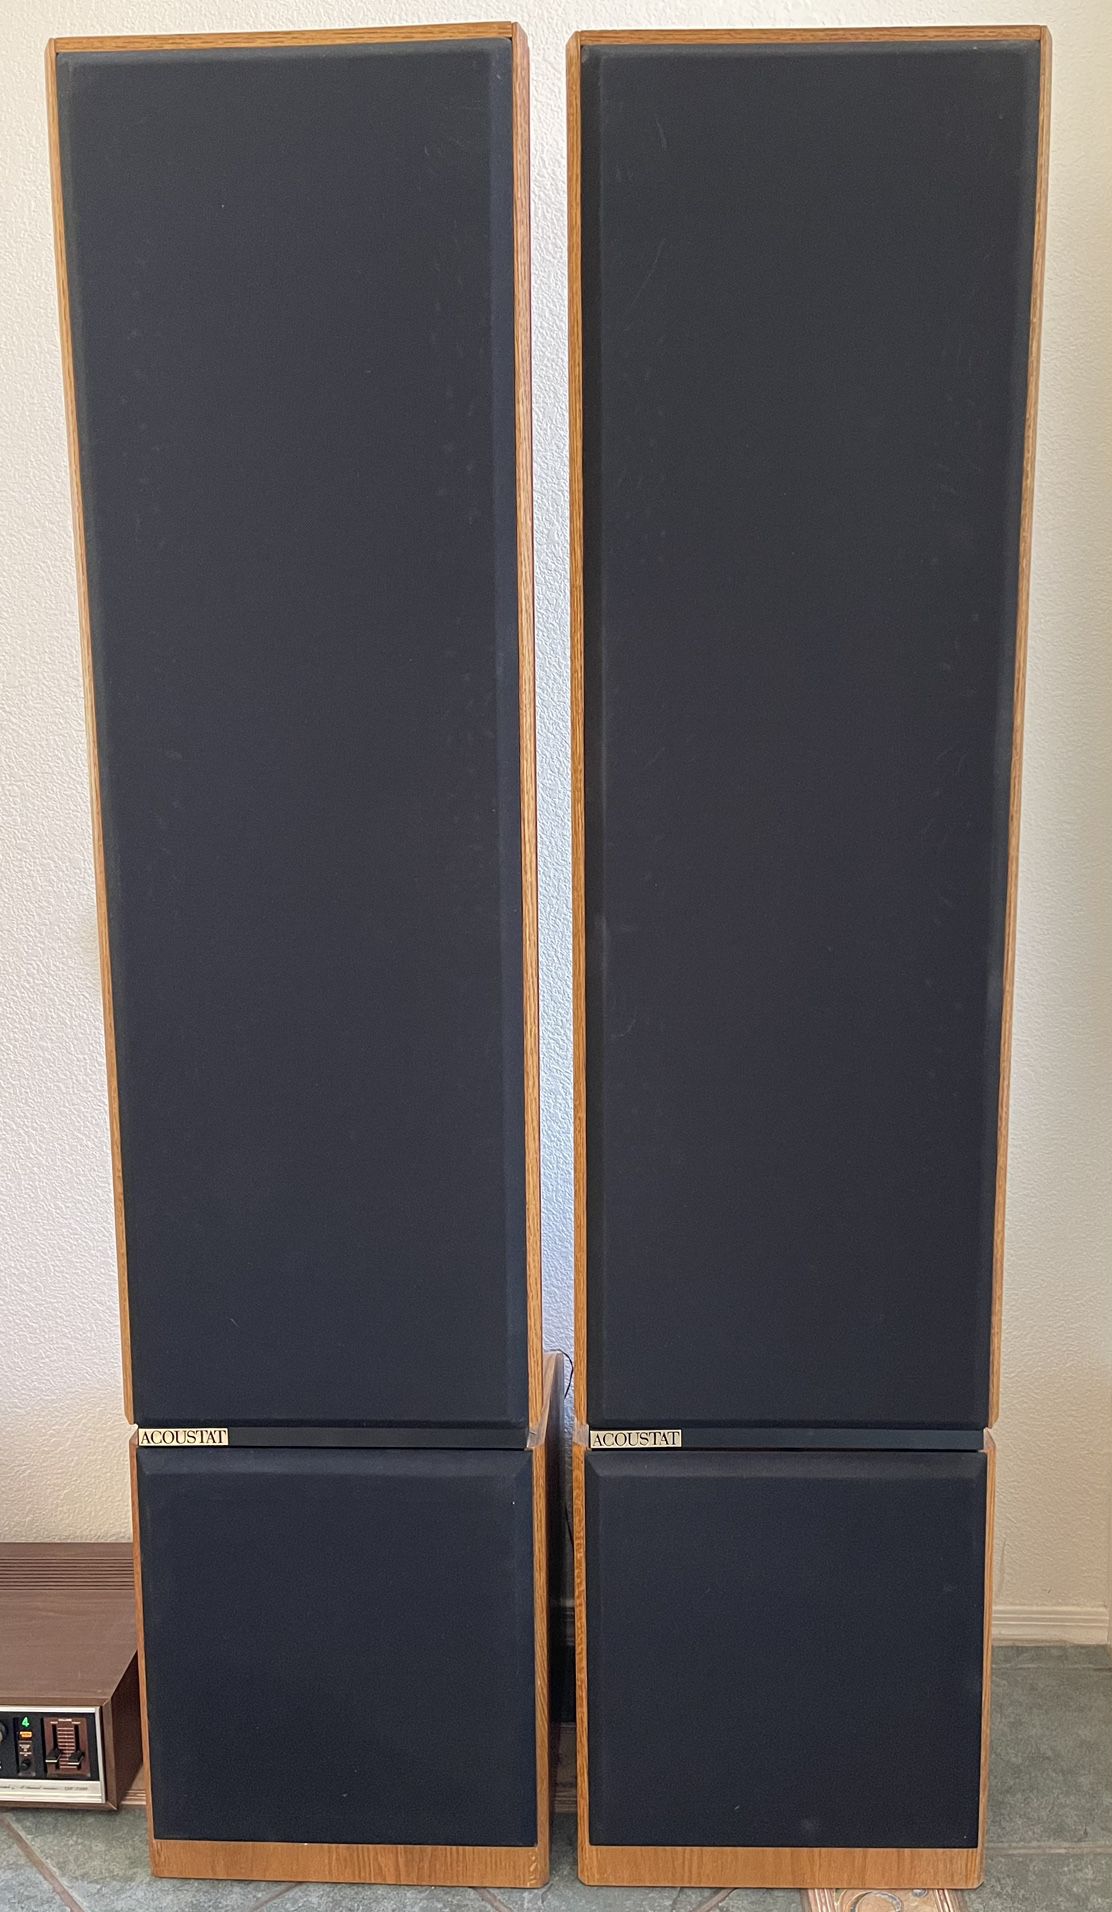 68” tall Rockford Acoustat Spectra 1100 Electrostatic Speakers, made in USA, See Description For More Info 